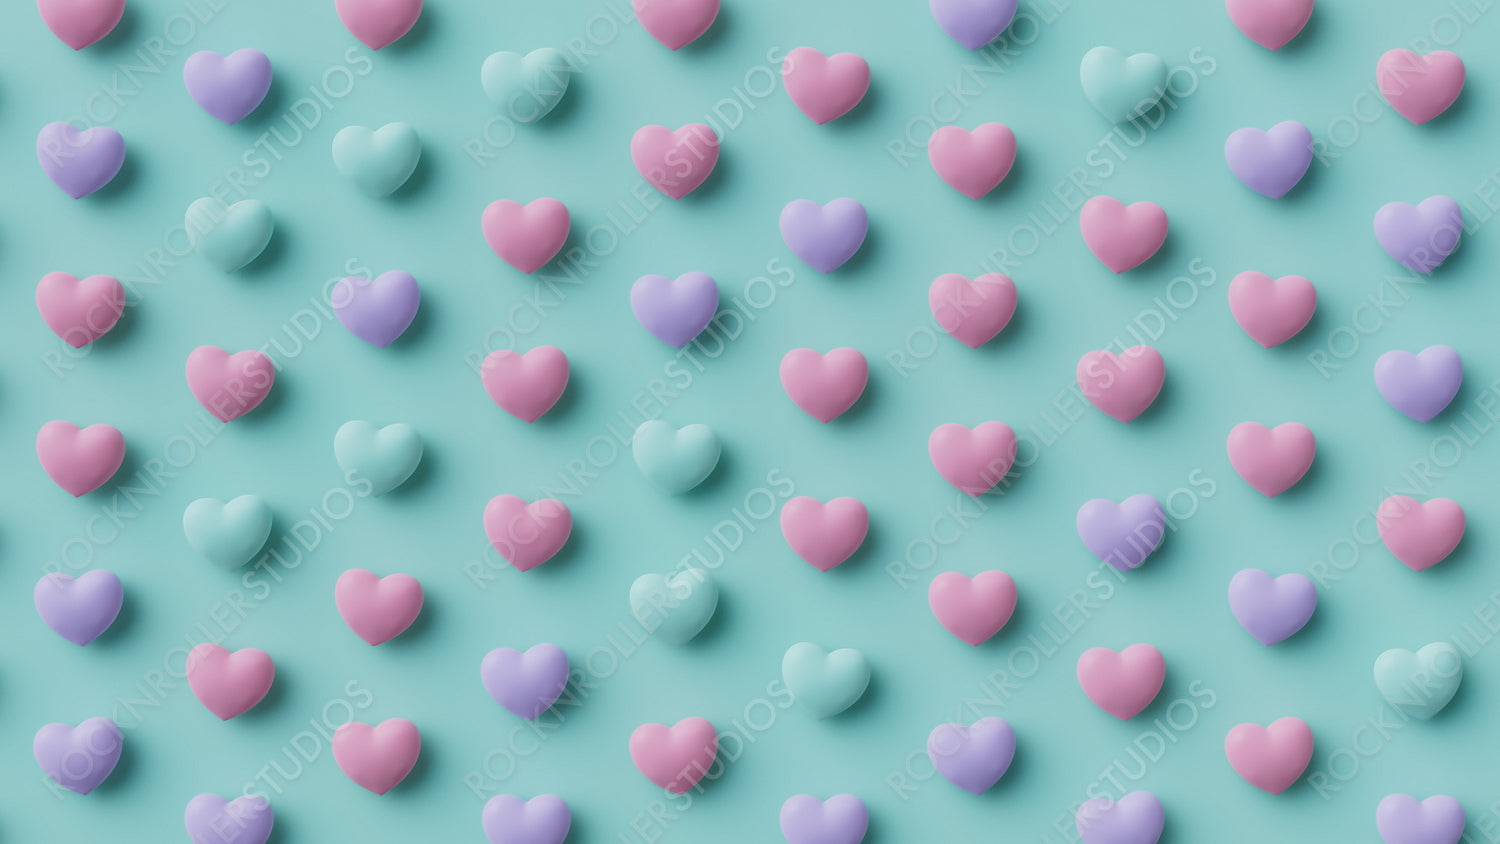 Multicolored Heart background. Valentine Wallpaper with Pink, Violet and Turquoise love hearts. 3D Render